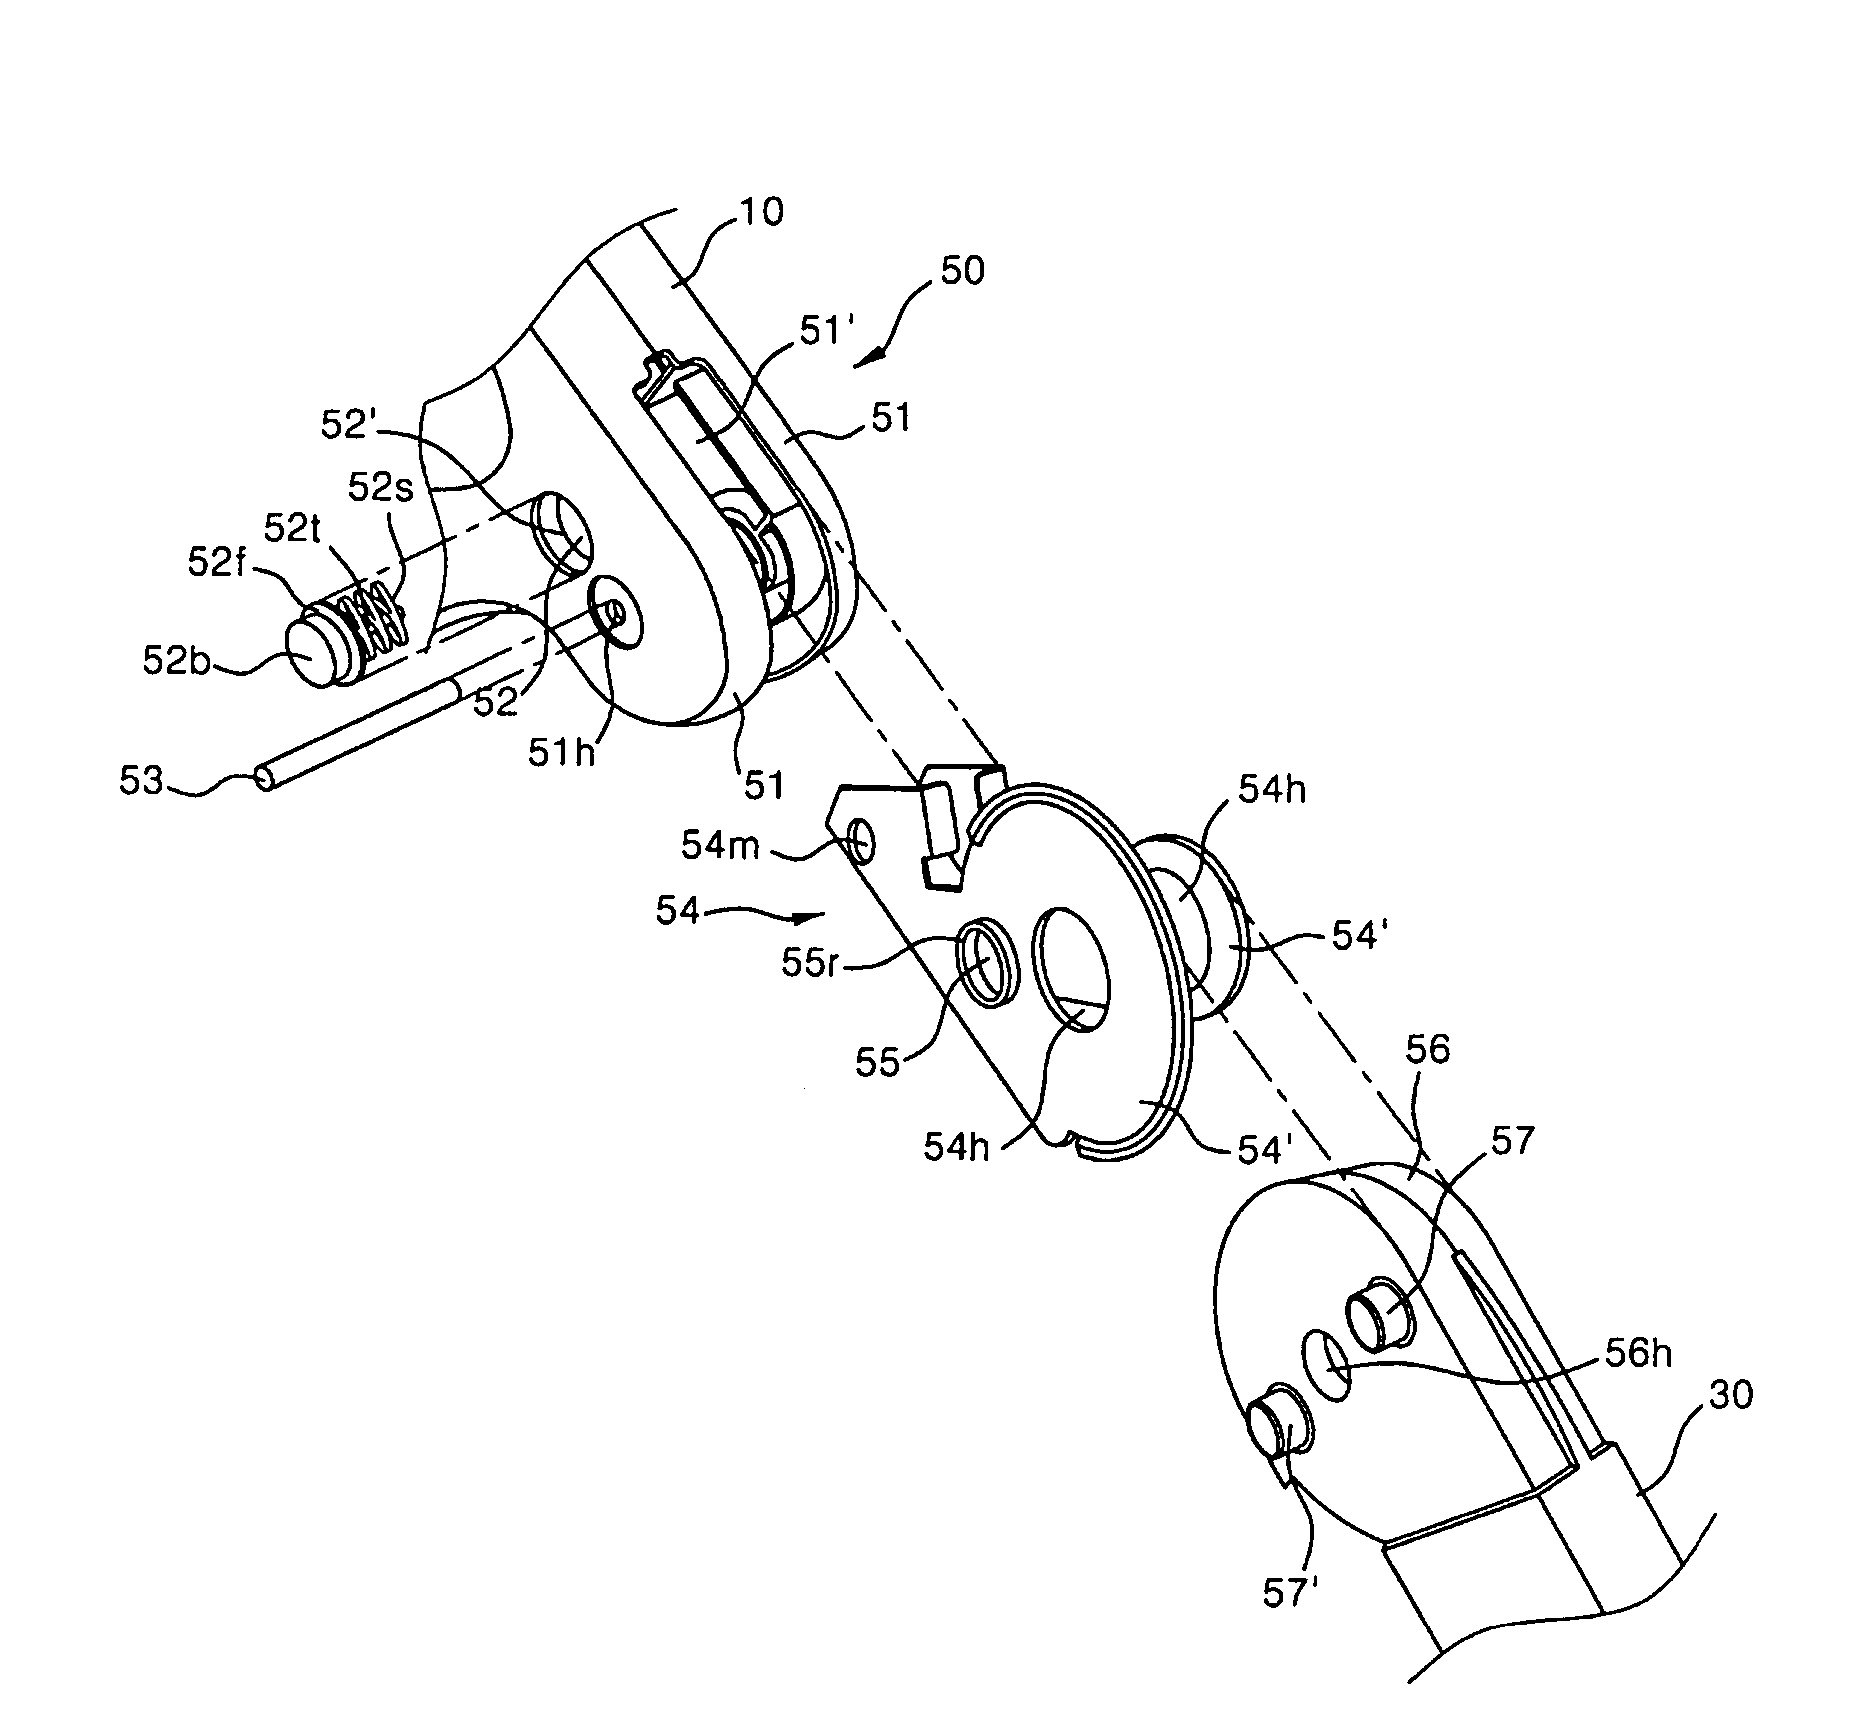 Upright type vacuum cleaner having multi joint portion